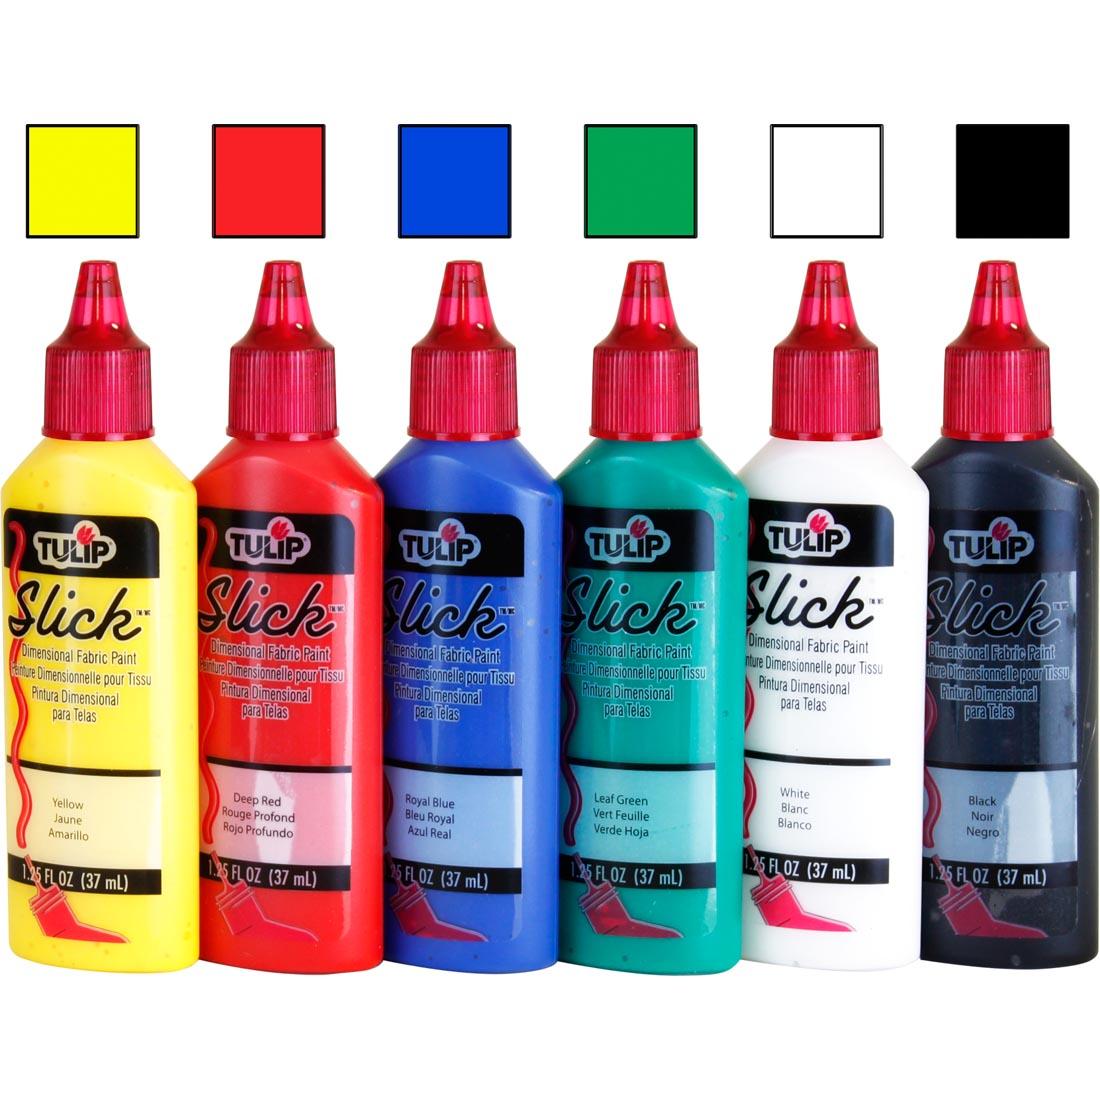 Tulip Slick Dimensional Fabric Paint Bottles with Color Swatches Above